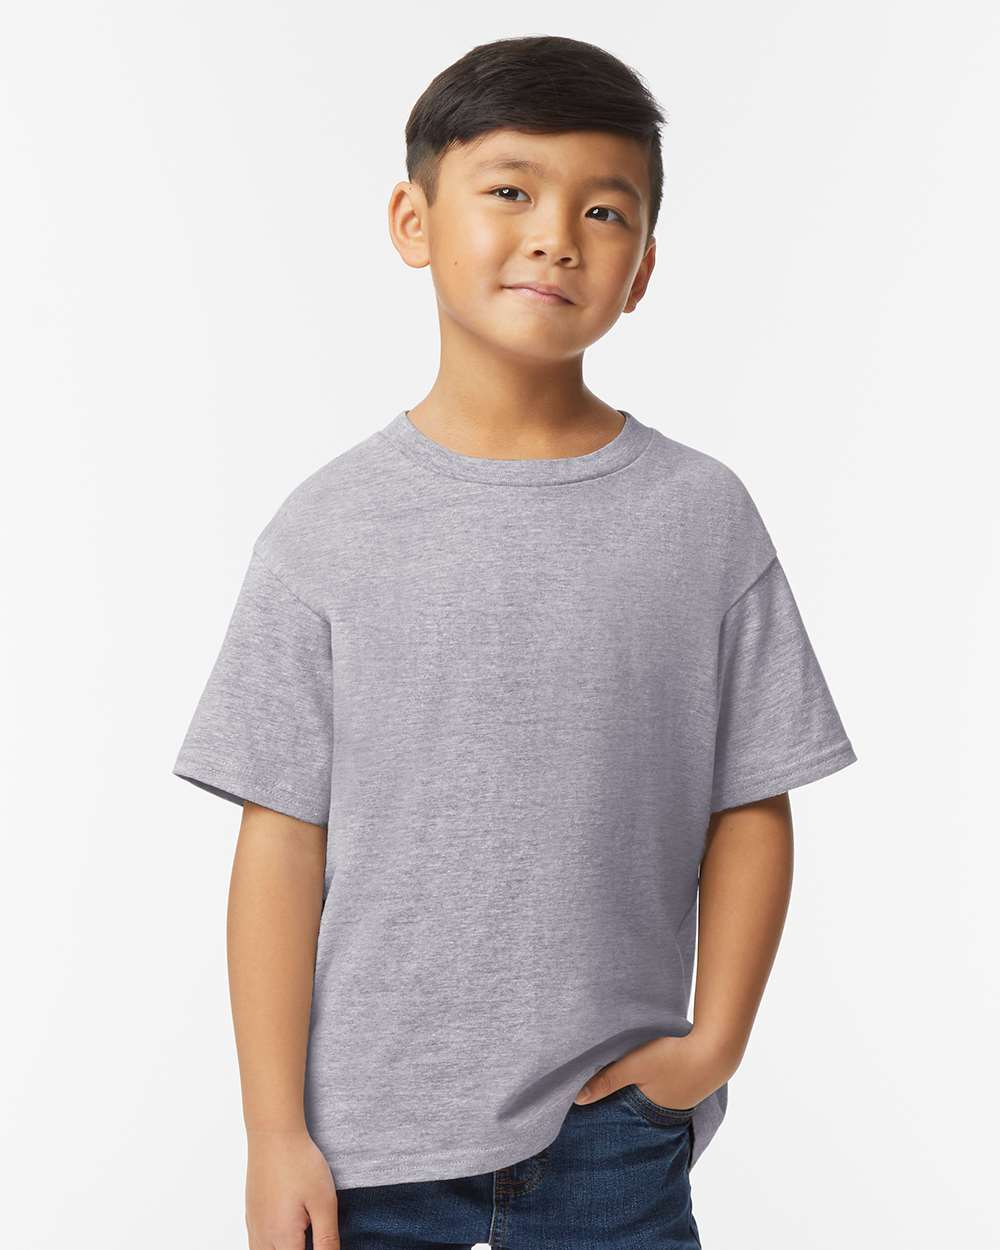 Gildan Softstyle® Youth Midweight T-Shirt 65000B #colormdl_Sport Grey